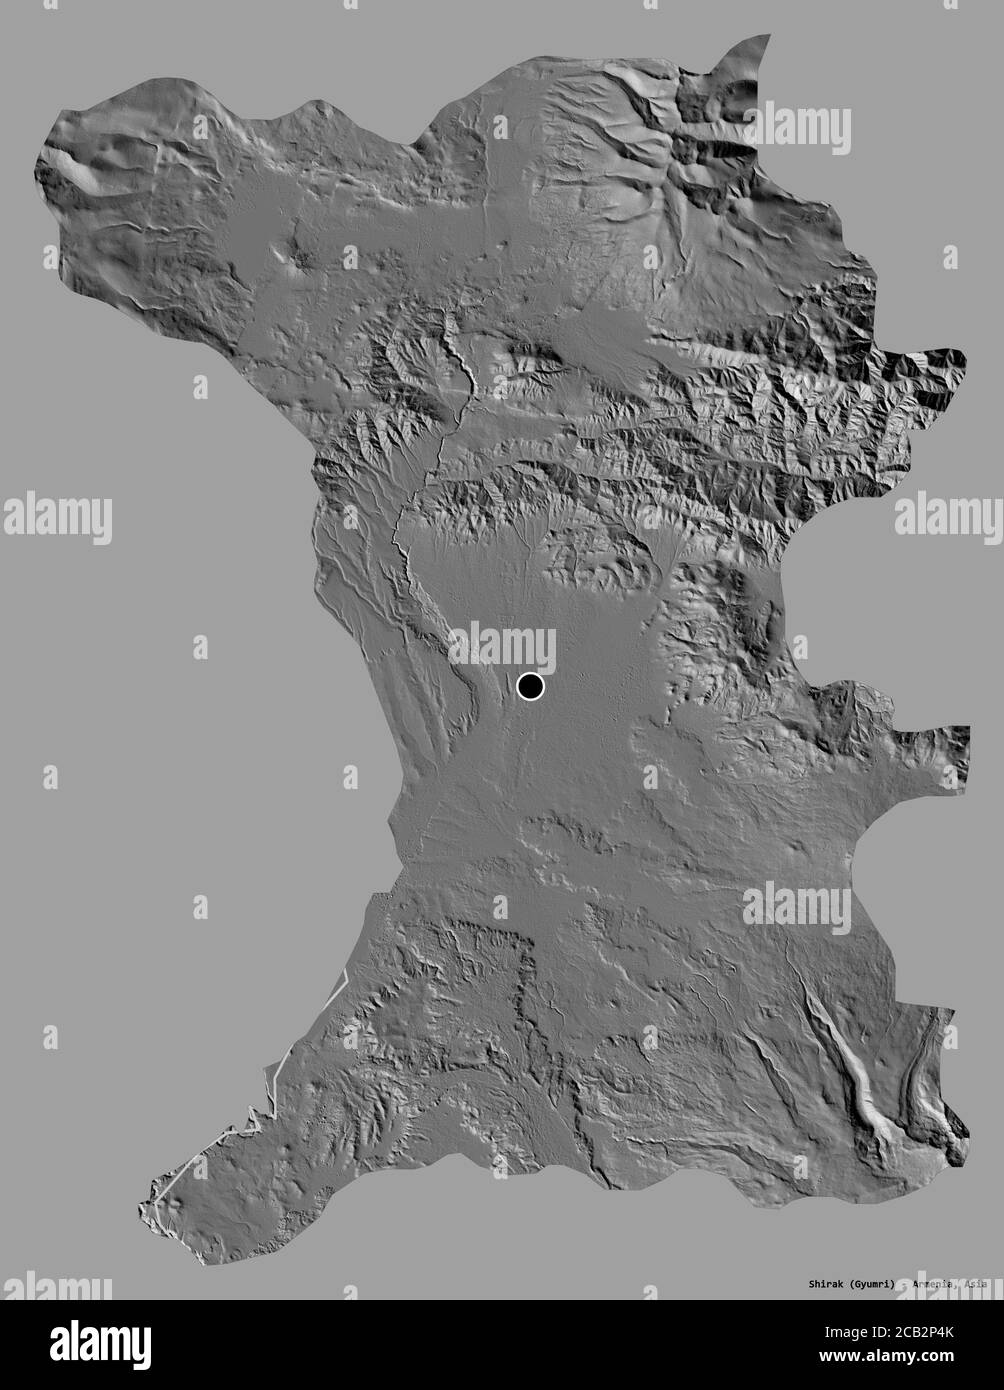 Shape of Shirak, province of Armenia, with its capital isolated on a solid color background. Bilevel elevation map. 3D rendering Stock Photo